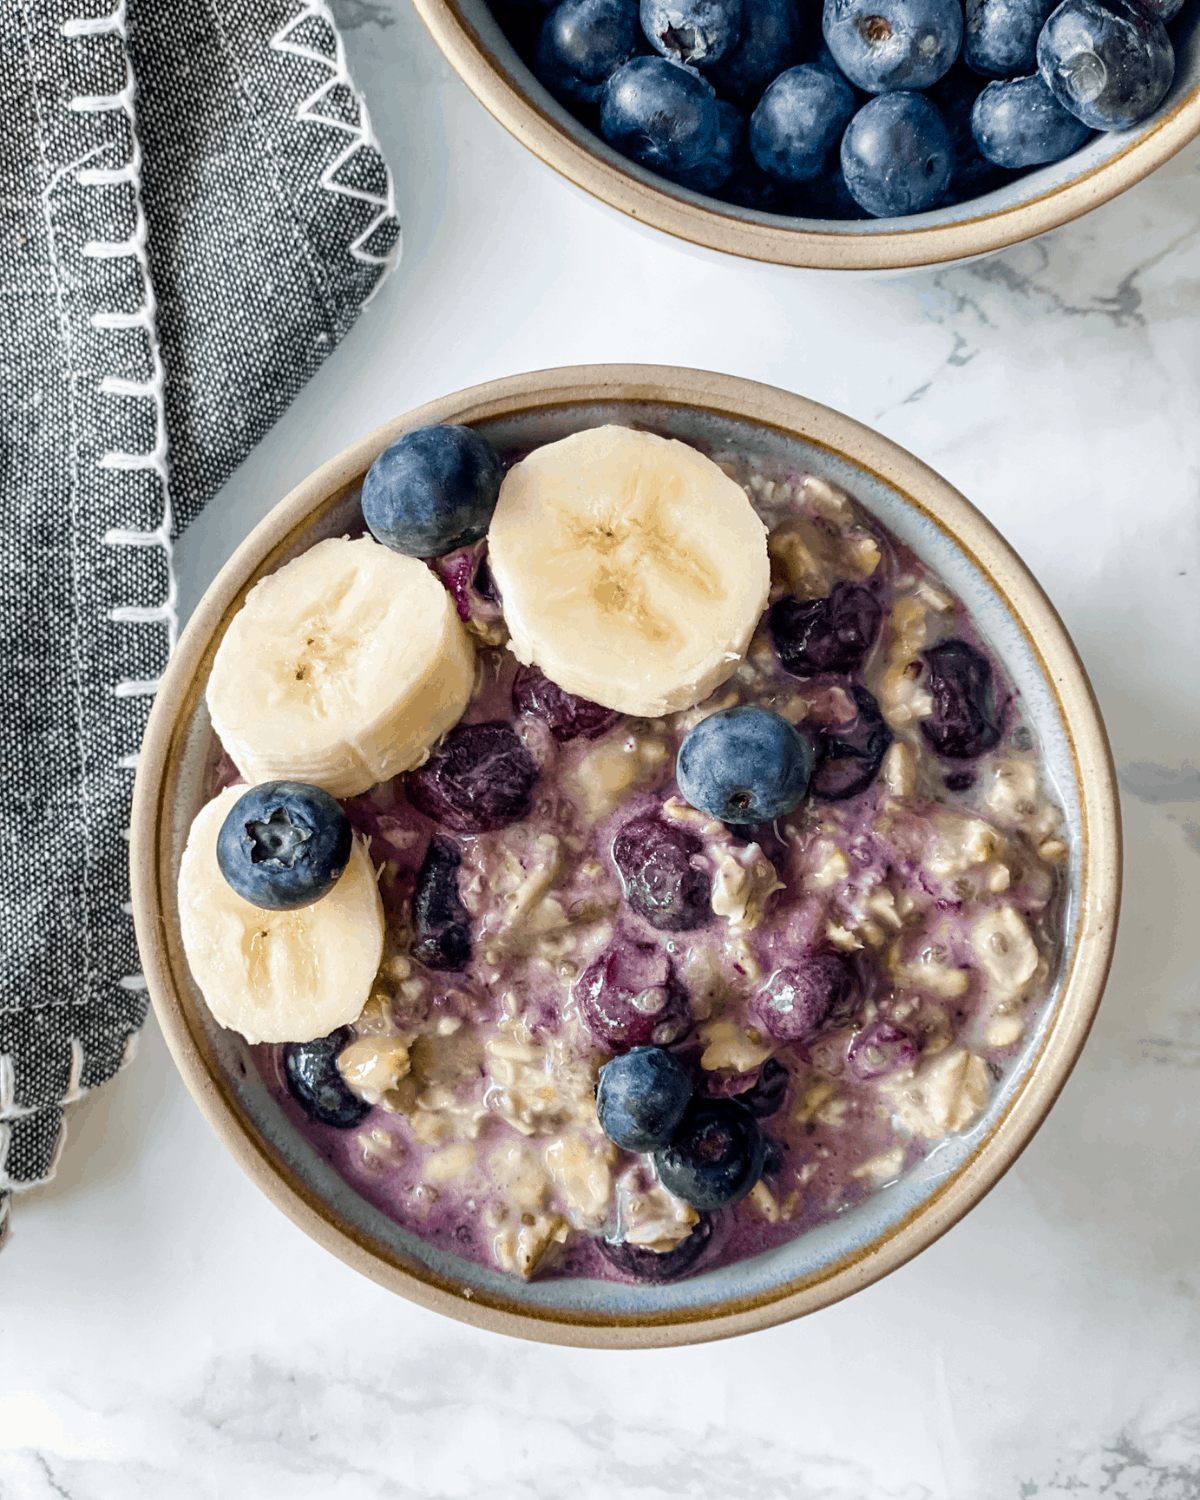 delicious creamy oats with blueberries and bananas in a bowl